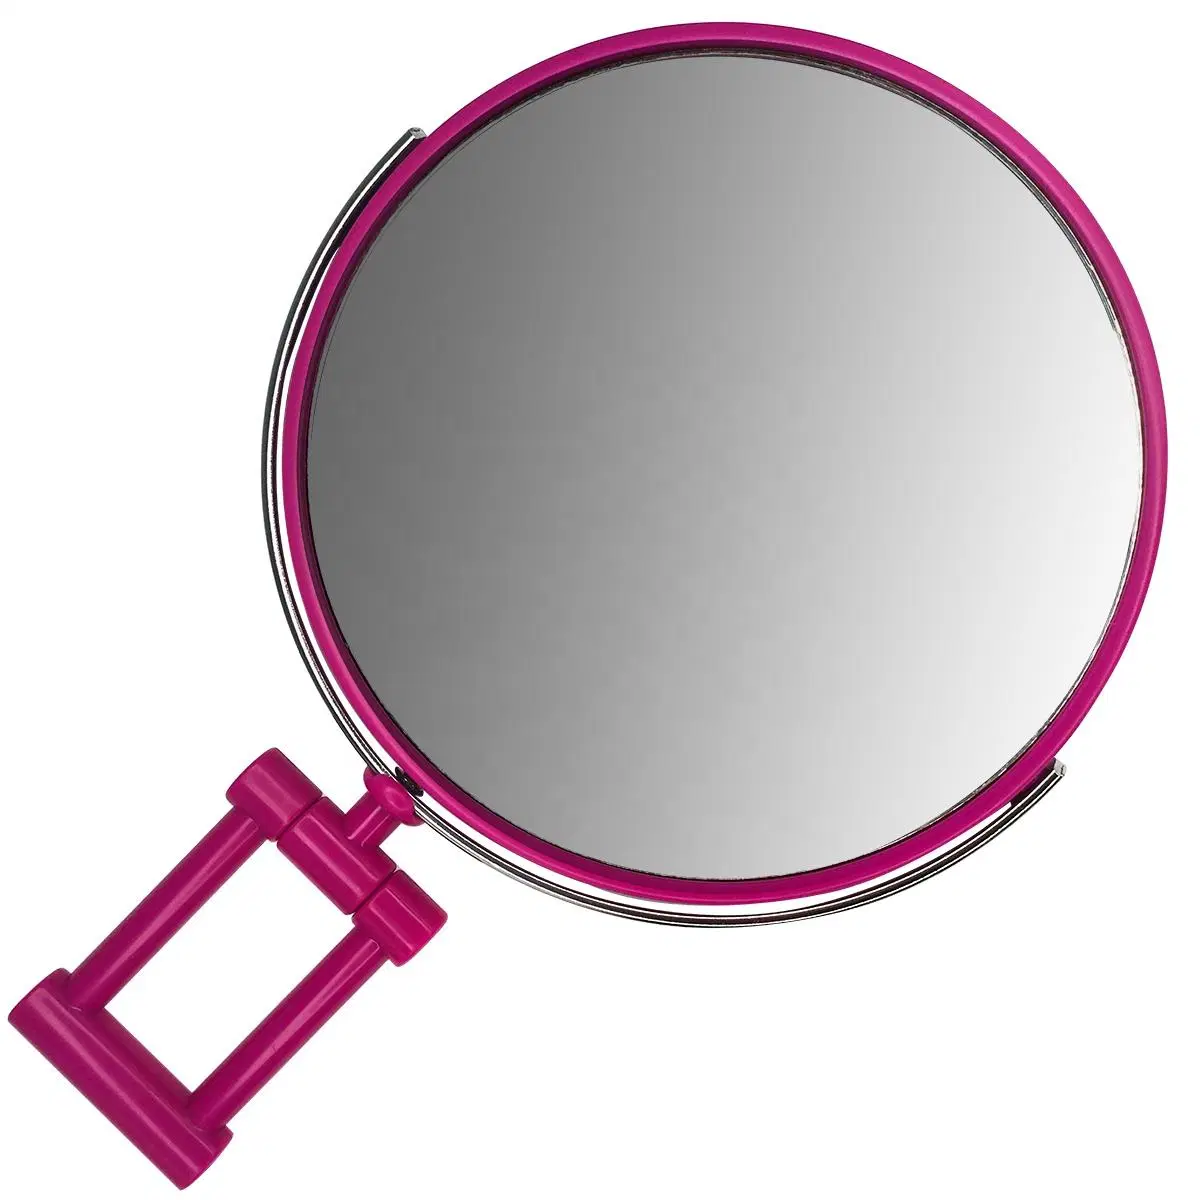 Professional Hairdressing Salon Barber Beauty Mirror High Quality Cosmetic Mirror Double Sided Magnifying Make up Mirror